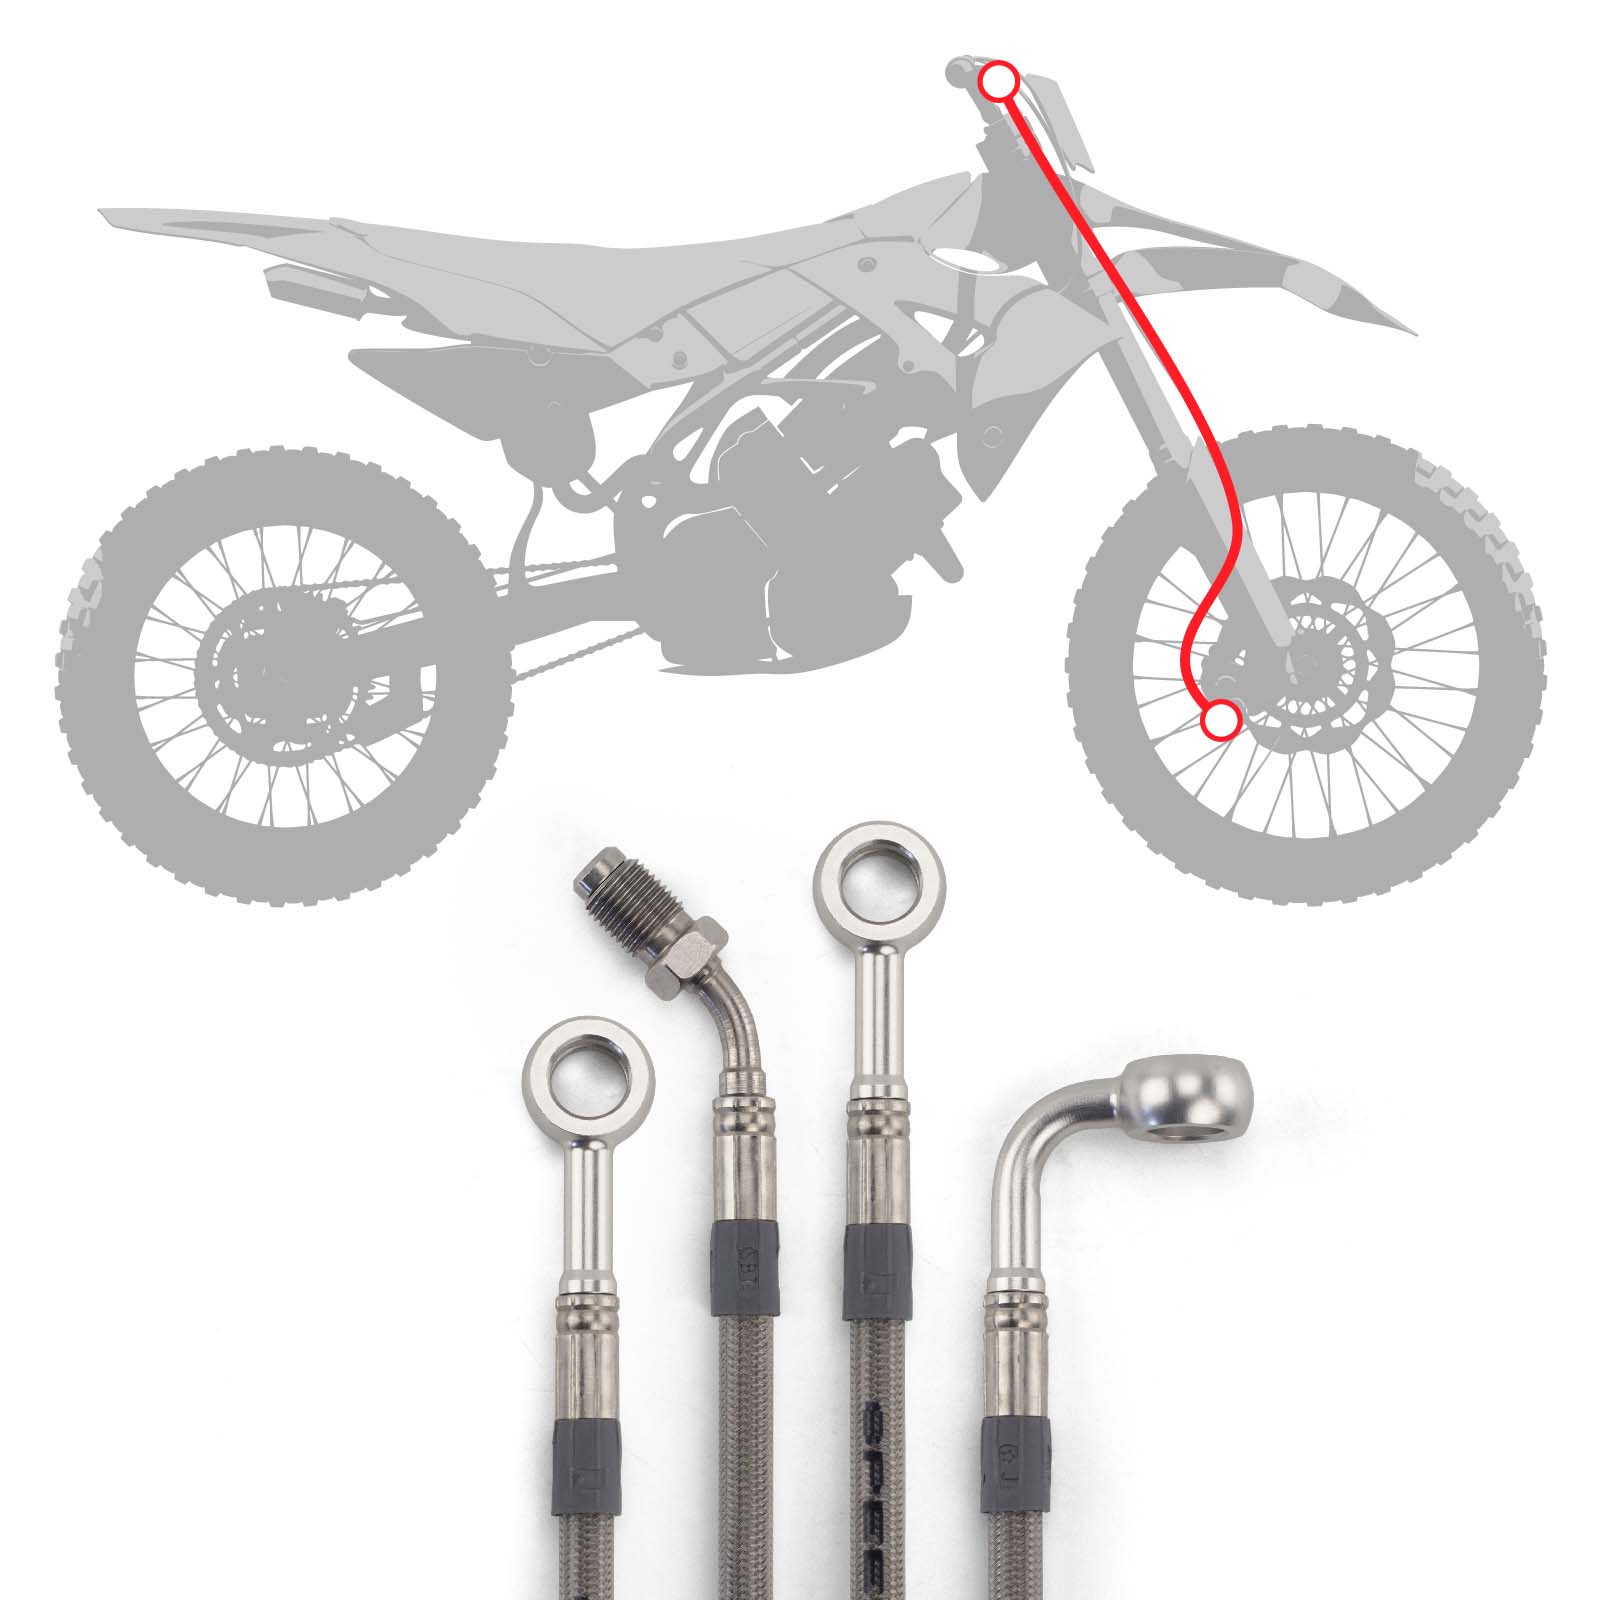 Raximo steel braided brake hose kit front installed like... for Model:  Suzuki DR 650 RSE SP43B 1991-1996